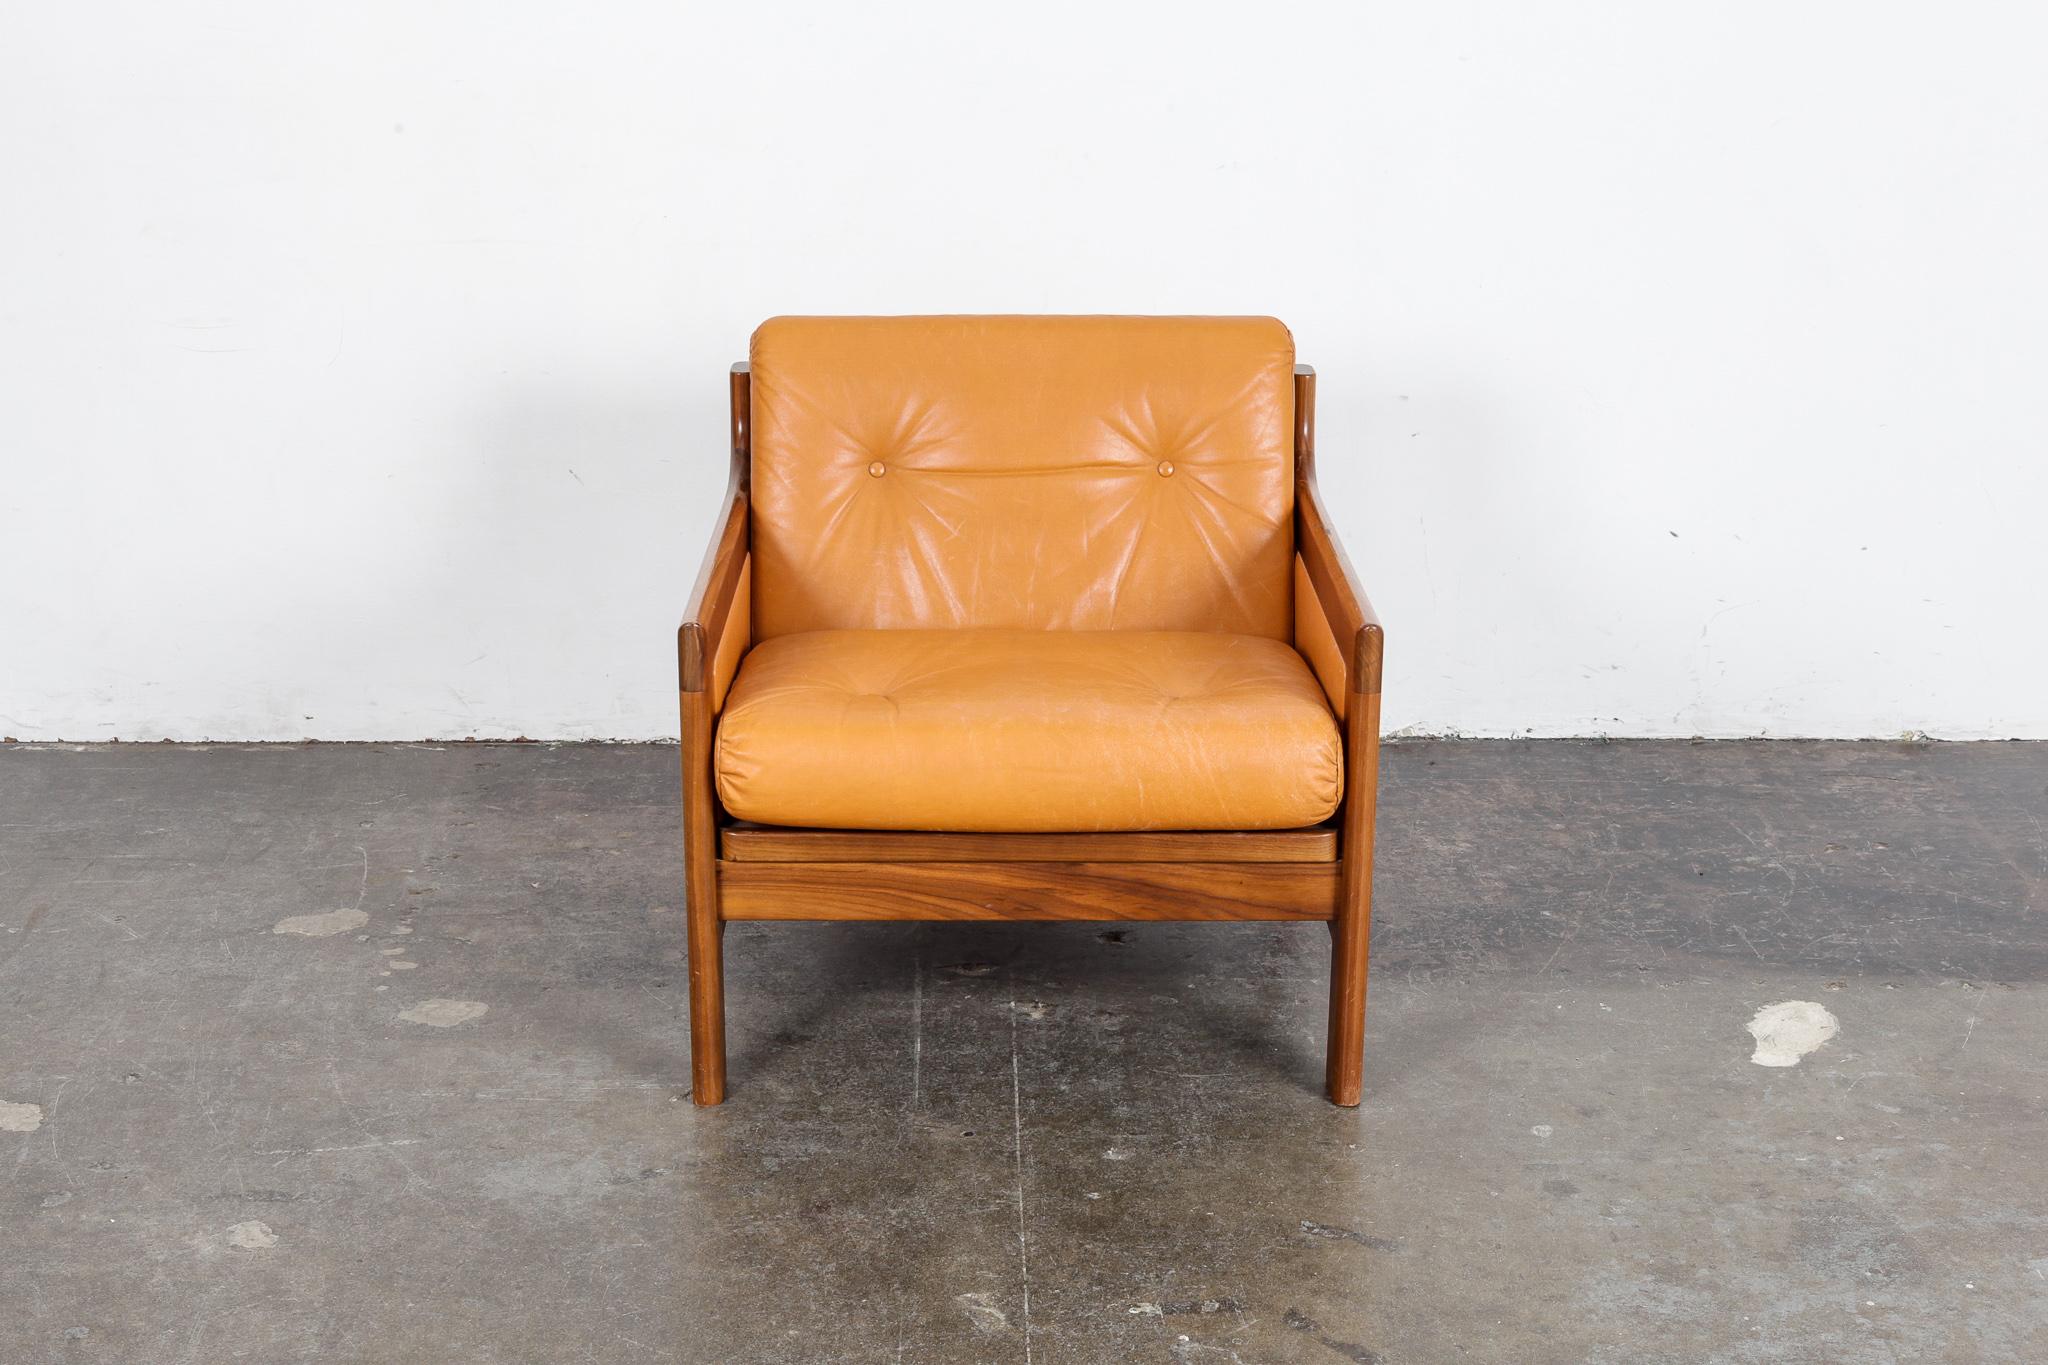 Swedish 1960s walnut lounge chair in marigold leather designed by Karl Erik Ekselius for OPE Mobler, with button tufted back and seat cushions.